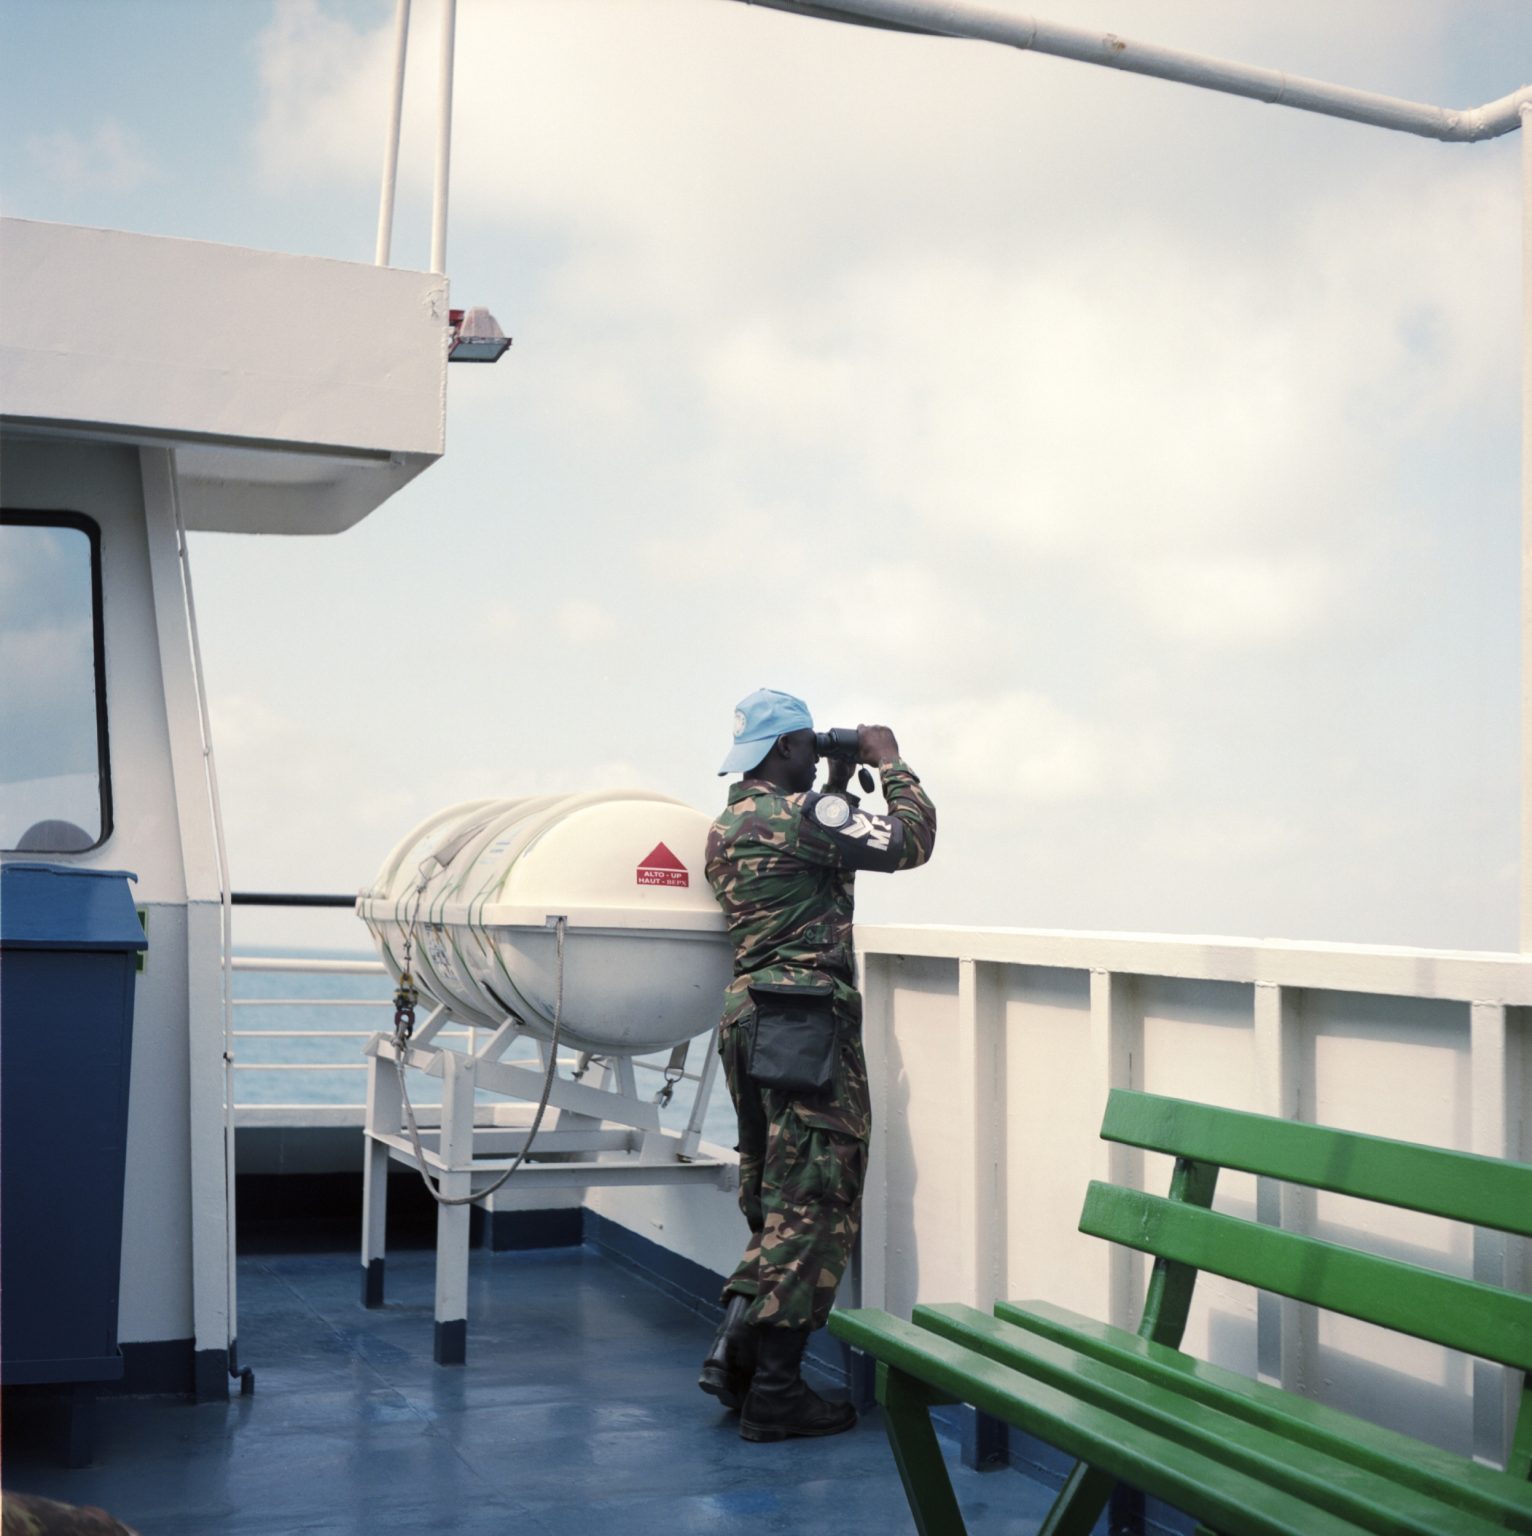 Naqura, Lebanon. A UNIFIL tanzanian military police officer observes the coast as the ferry Carolyn, used by UNIFIL to move troops between Beirut and south Lebanon, navigates.